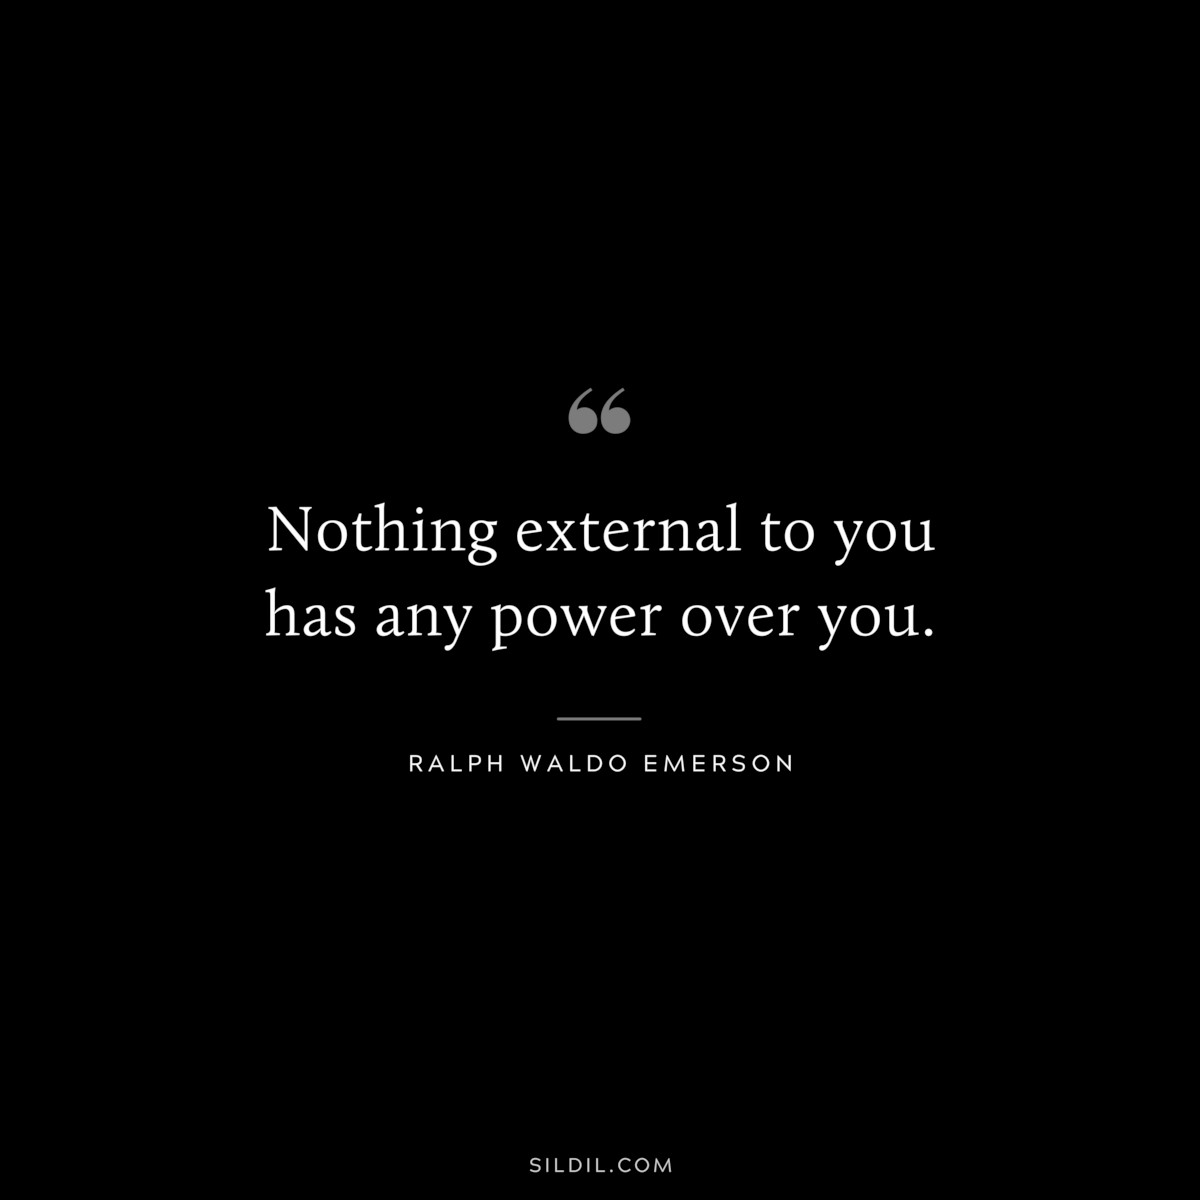 Nothing external to you has any power over you. — Ralph Waldo Emerson